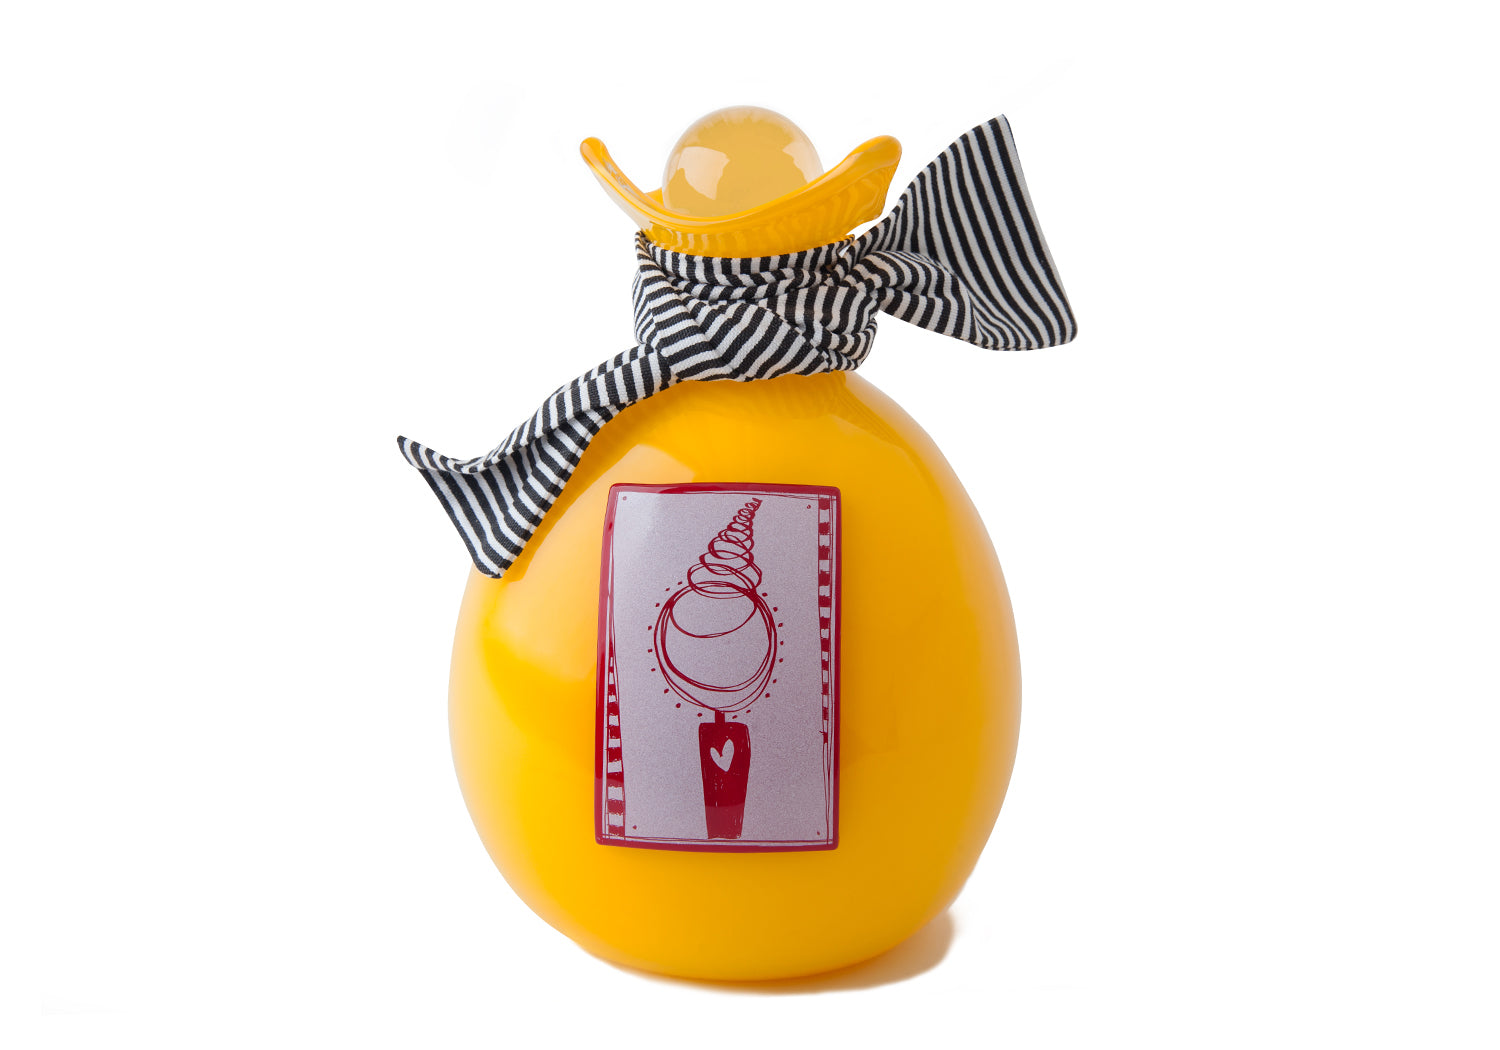 Picture of a bright yellow blown glass handkerchief wrapped ball cremation urn for children on sale at Muses Design Urns. Front view.